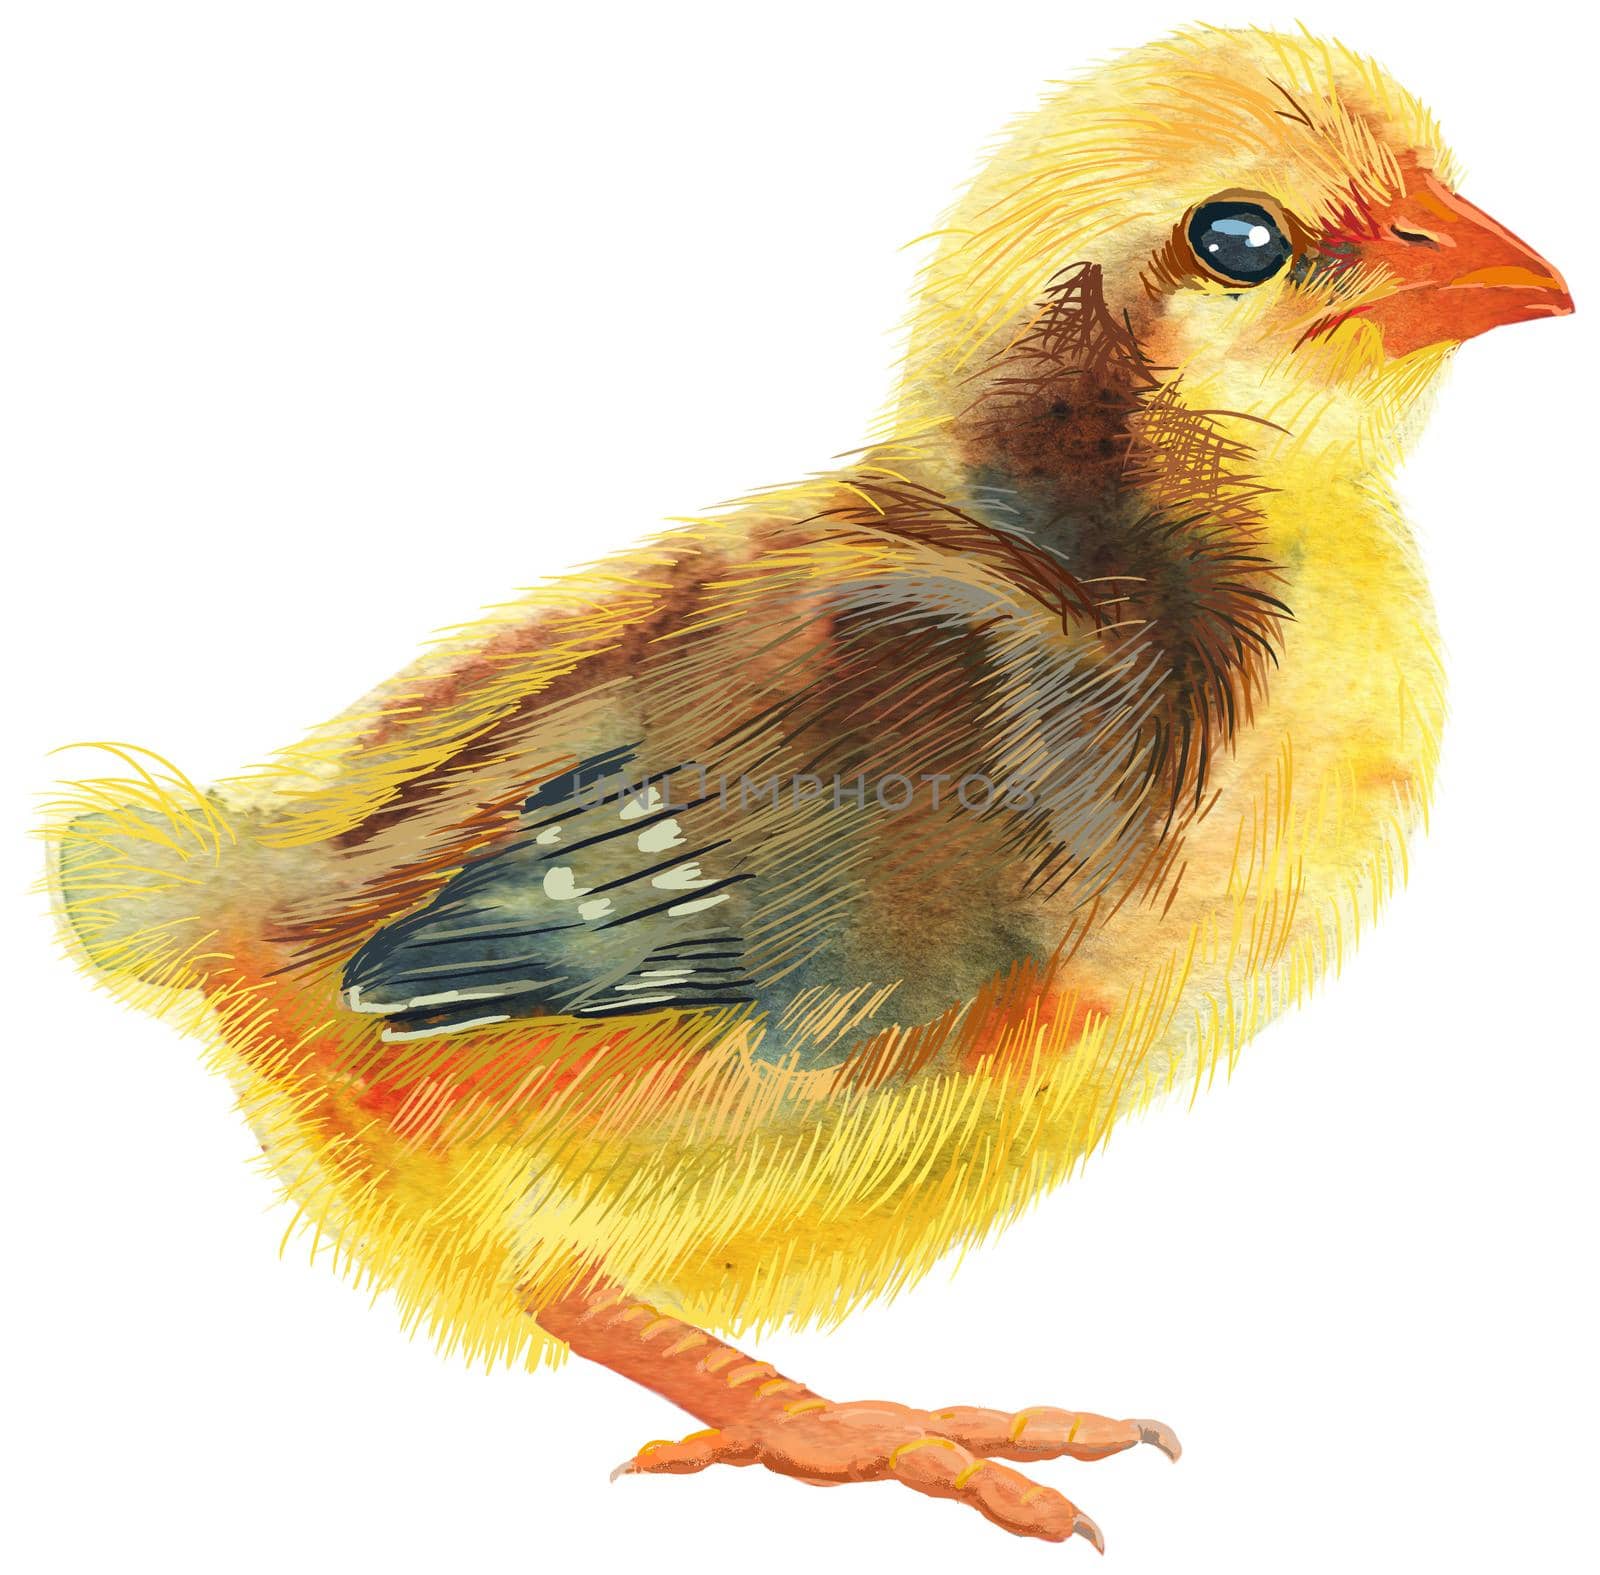 Hand painted young chicken with brown spots isolated on white background. Cute baby bird illustration for design